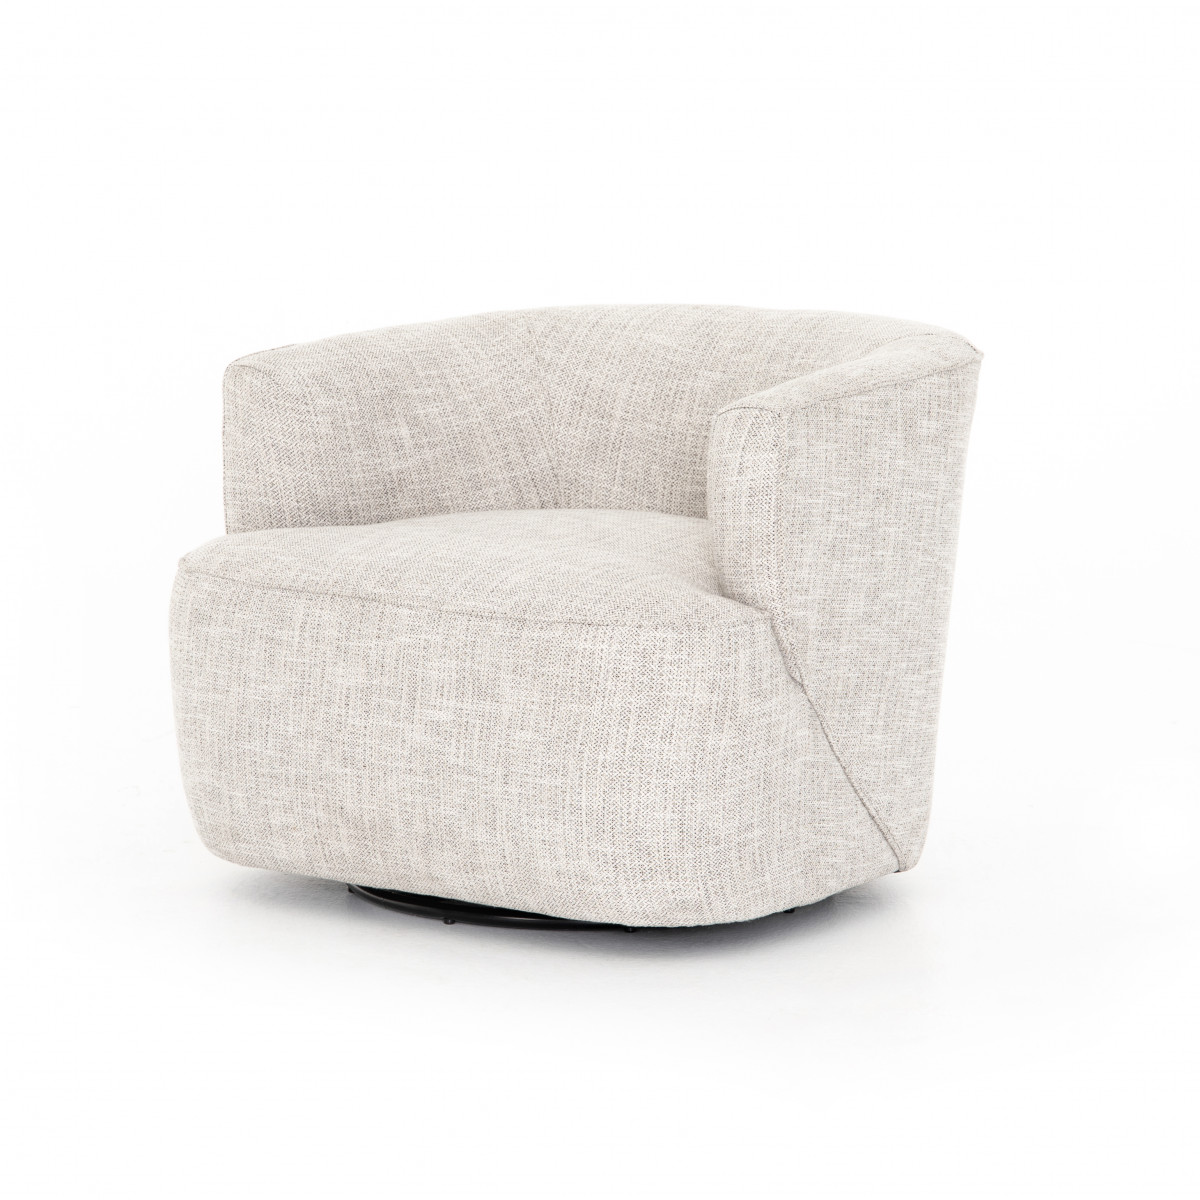 Shop Mila Swivel Chair in Brazos Dove from DiMare Design on Openhaus